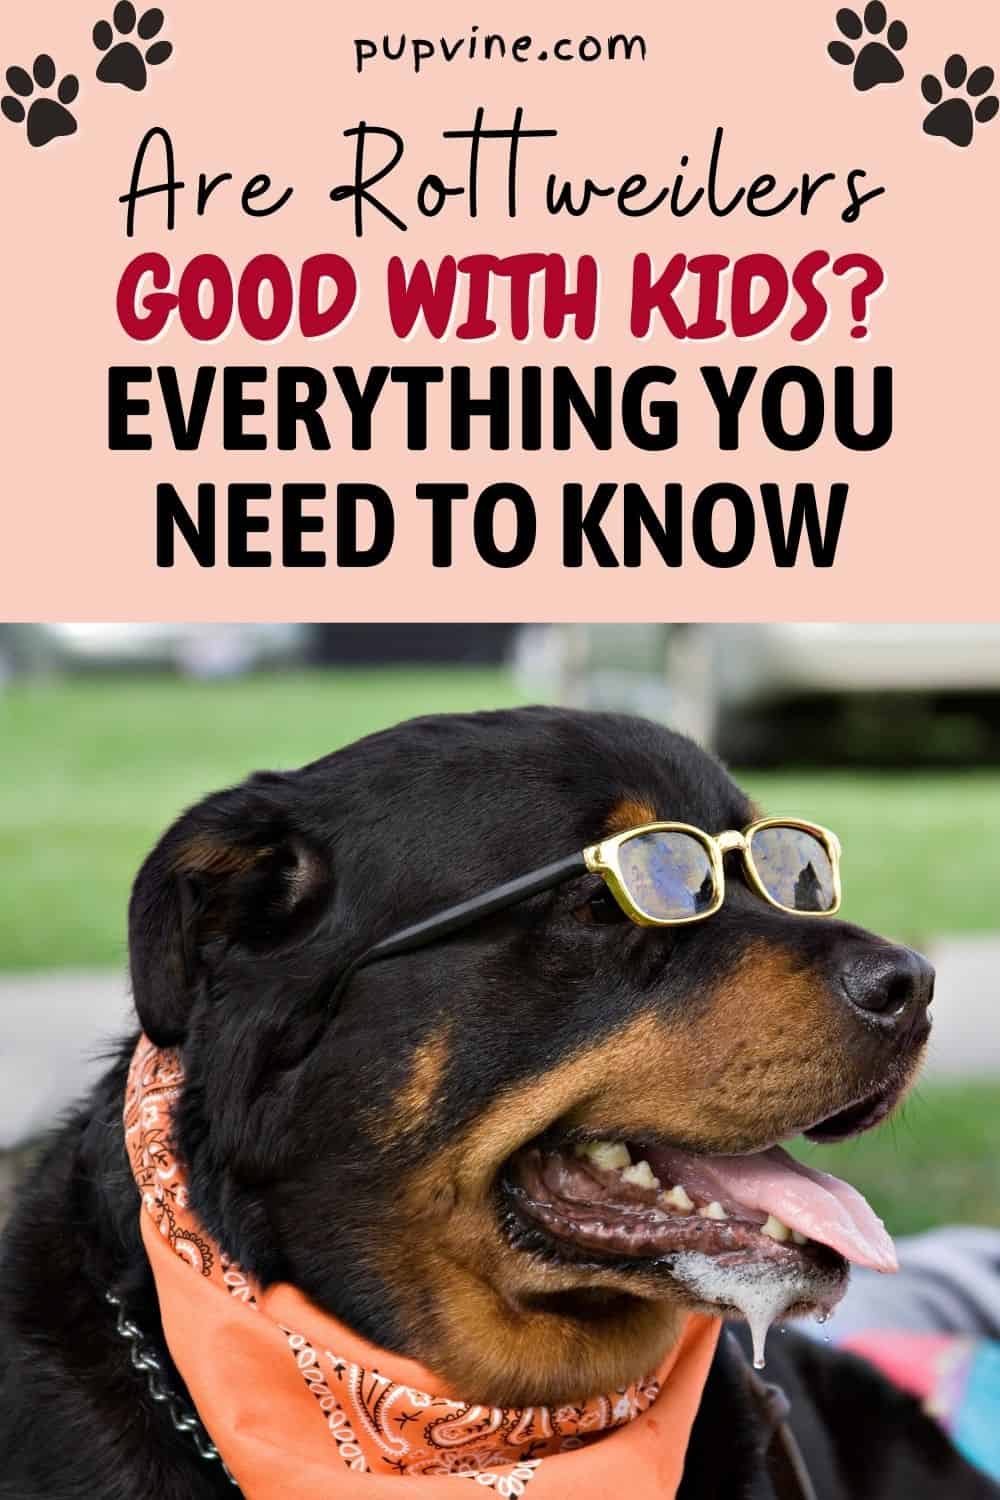 Are Rottweilers Good With Kids? Everything You Need To Know